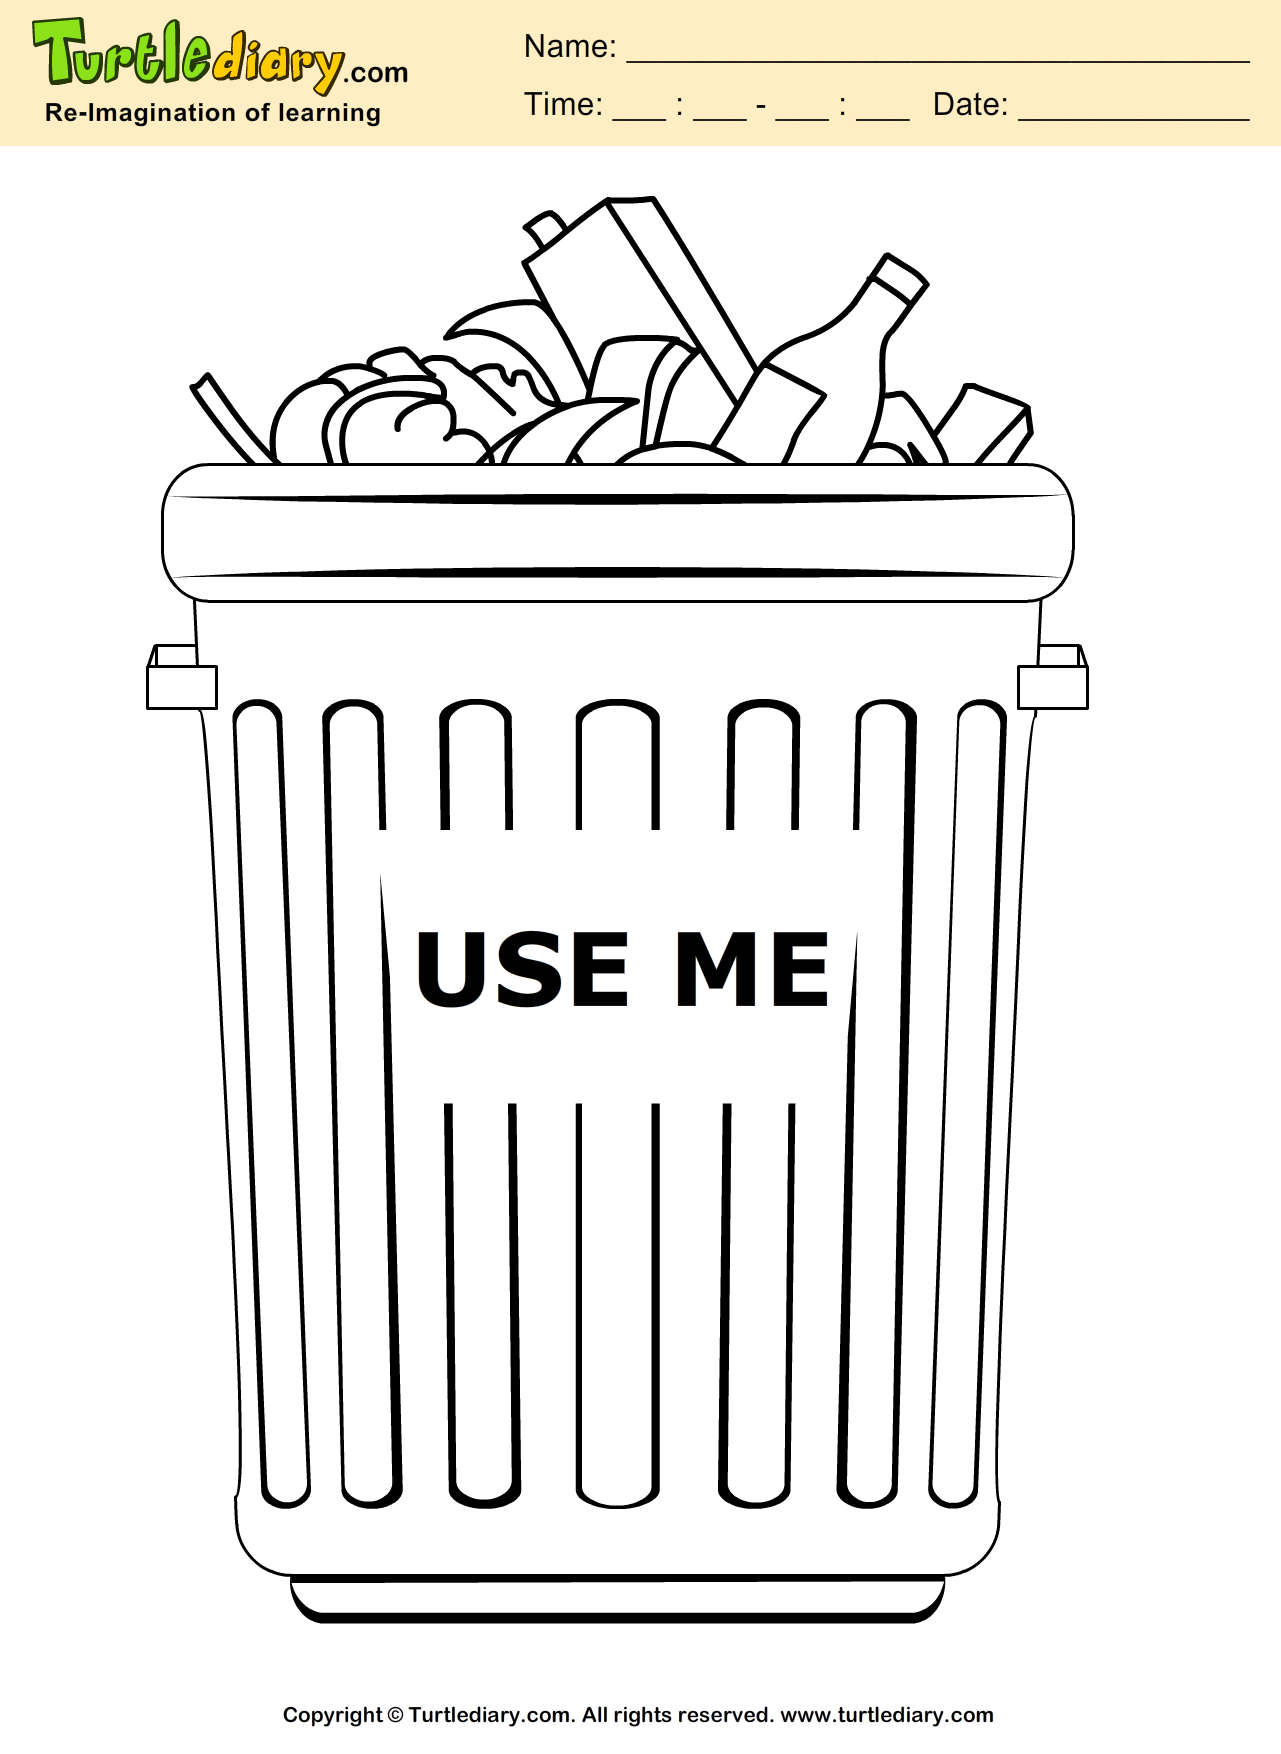 Recycle Coloring Page